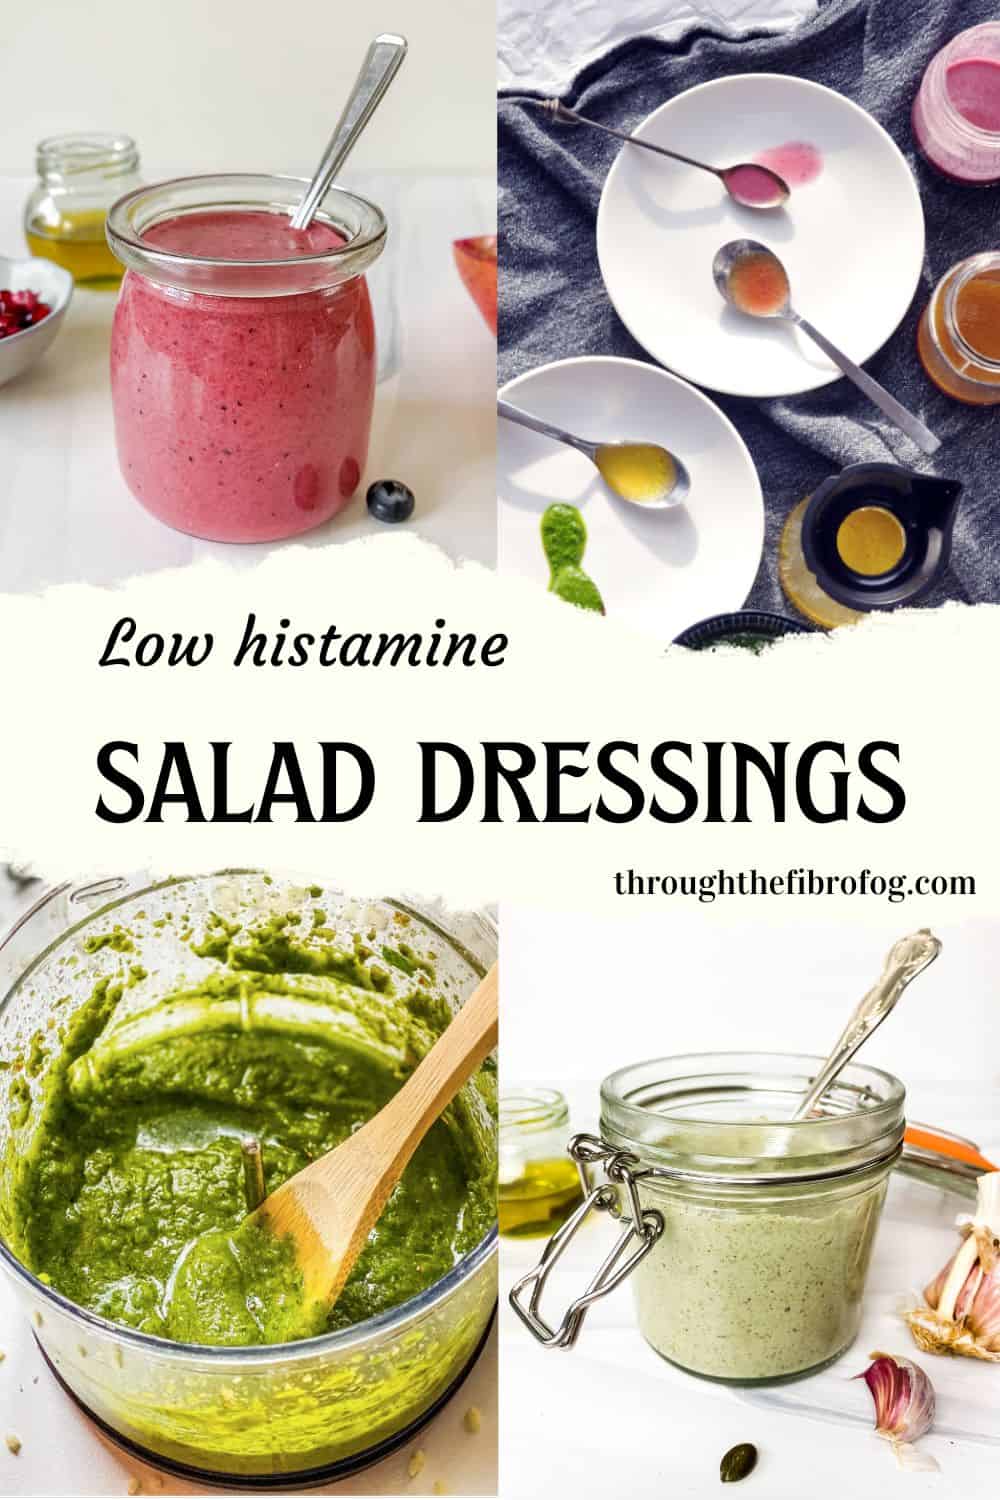 labeled collage of low histamine salad dressings including vinaigrette and pesto.